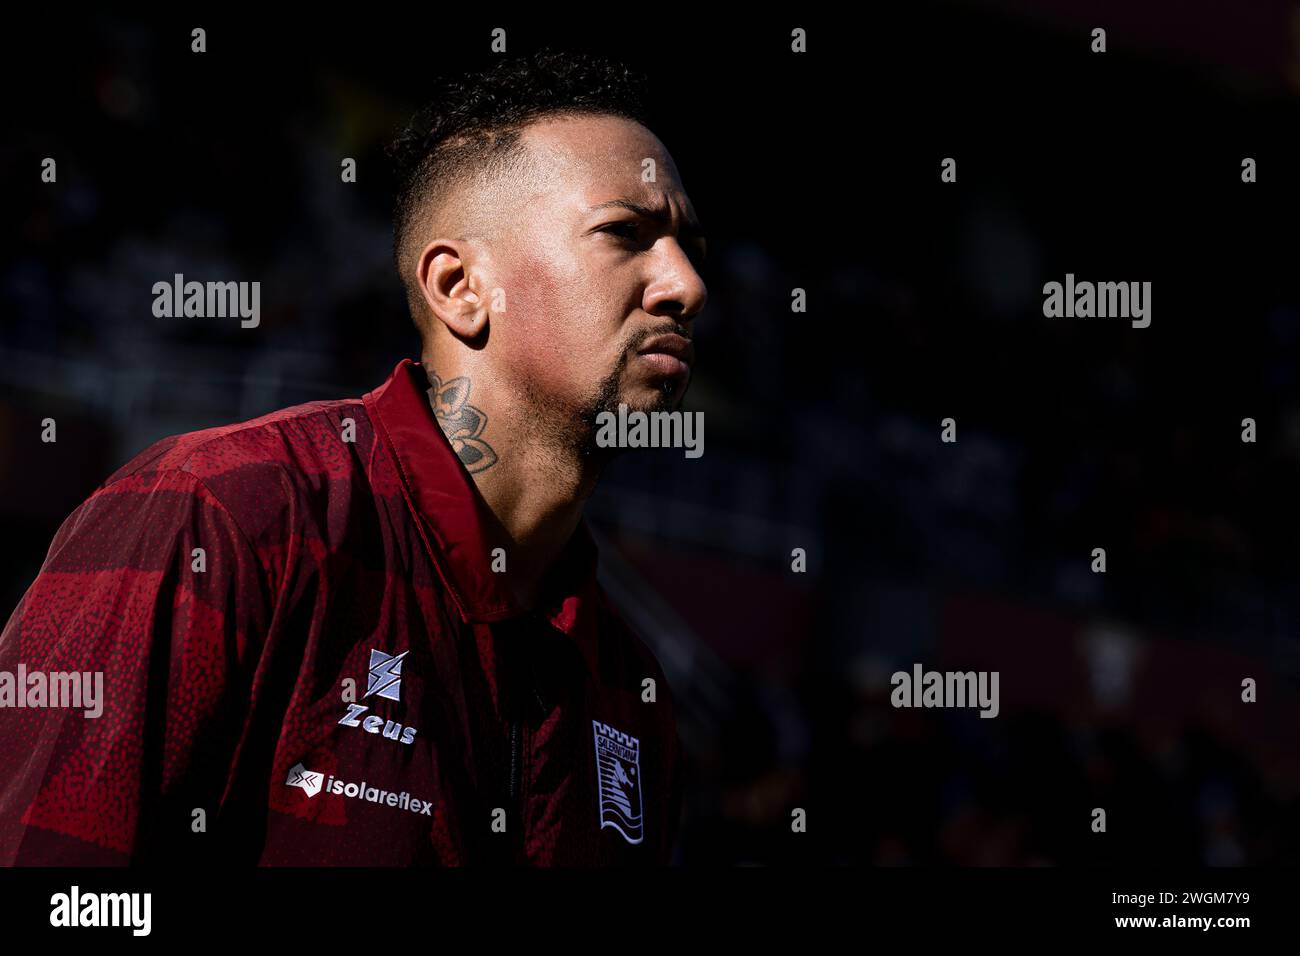 Turin, Italy. 4 February 2024. Jerome Boateng of US Salernitana looks on prior to the Serie A football match between Torino FC and US Salernitana. The match ended 0-0 tie. Nicolò Campo/Alamy Live News Stock Photo